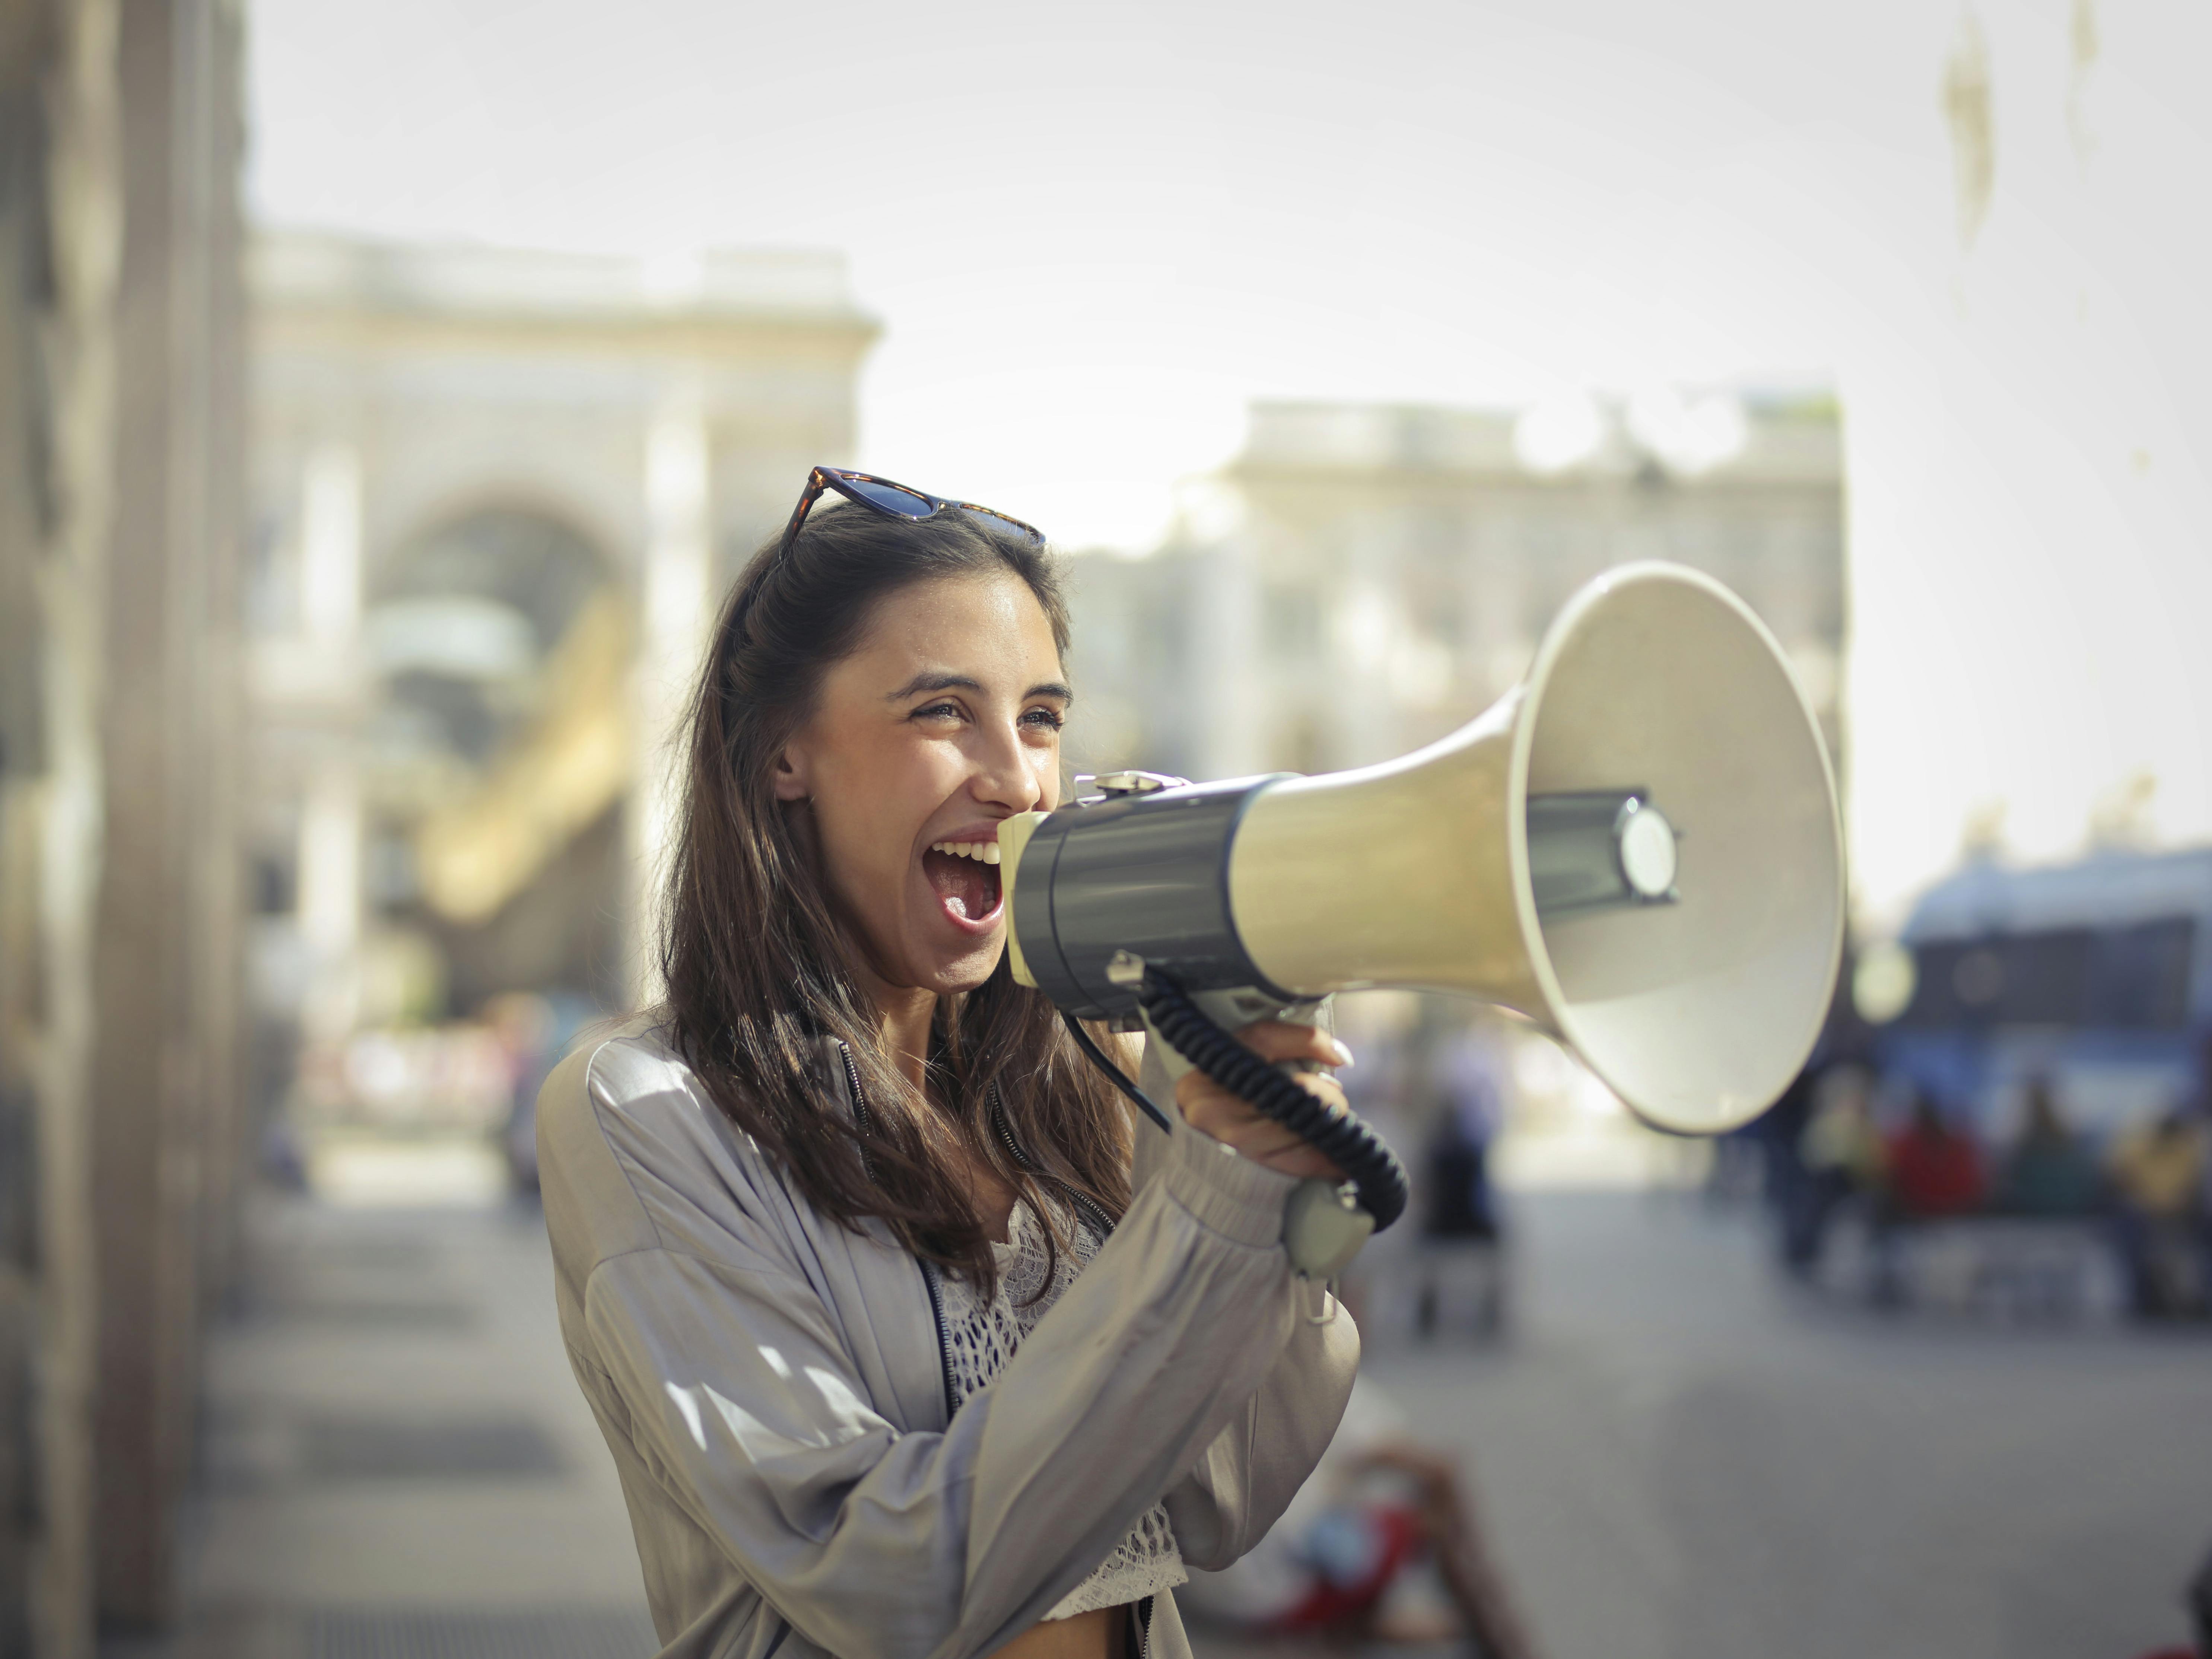 Image of a young women standing in an urban area holding a loudspeaker and speaking into it while smiling.